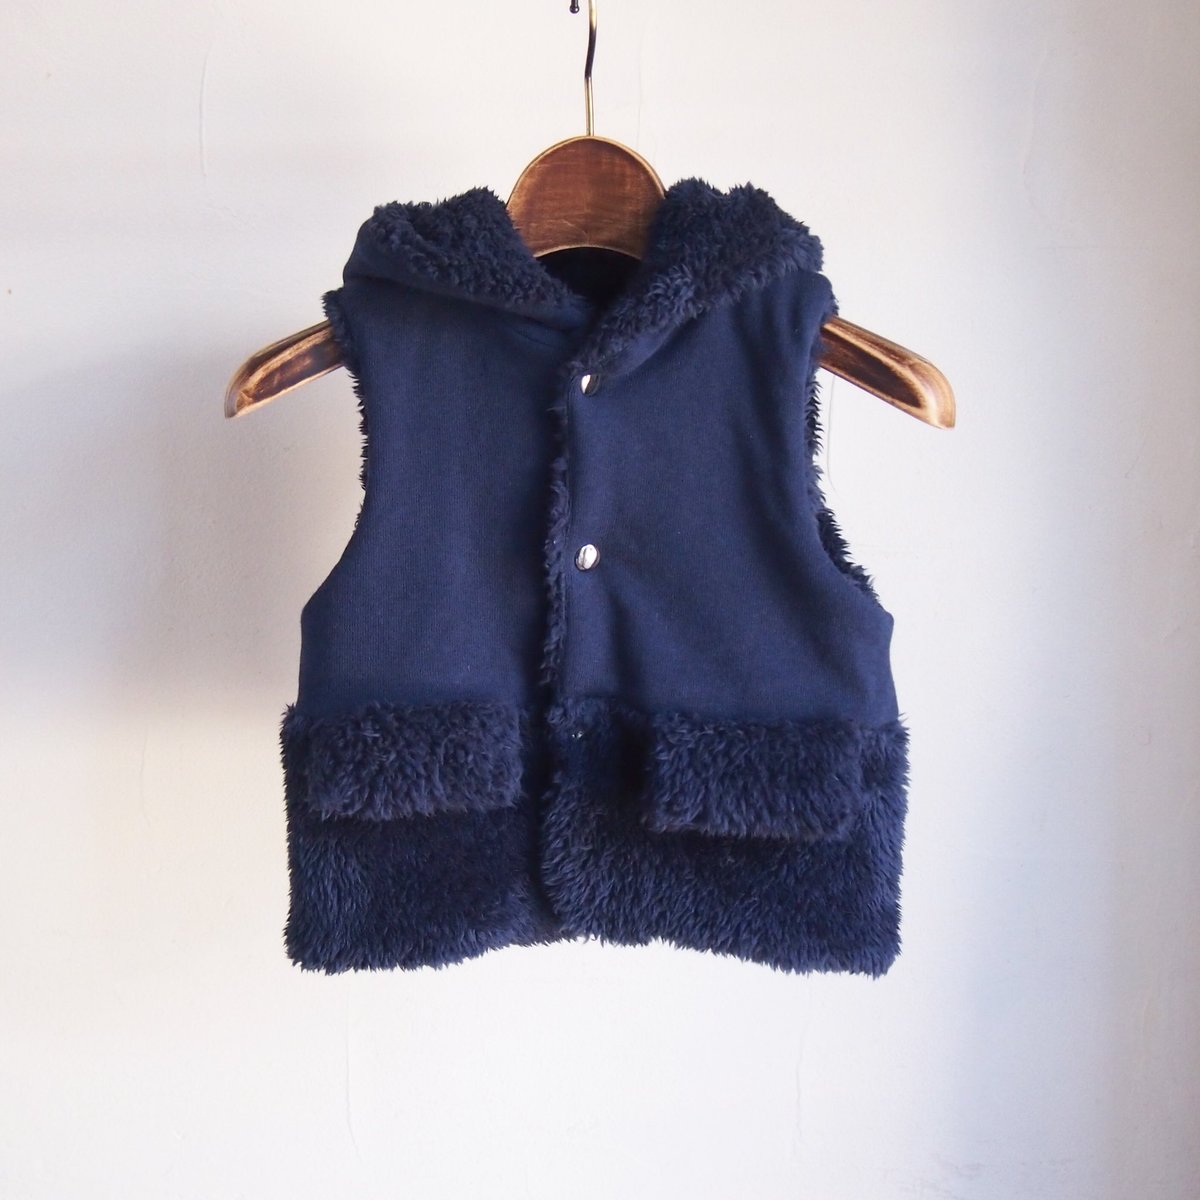 Fluffy reversible vest Size90 👶
¥2,950
Gray - SOLD OUT
Gray&White - Available
Navy - Available
.
For more information, please visit the website.
minne.com/sholette

#minne #handmade #kidsfashion #babyfashion #fluffyvest #boysmom #boysfashion #boysstyle #sholette